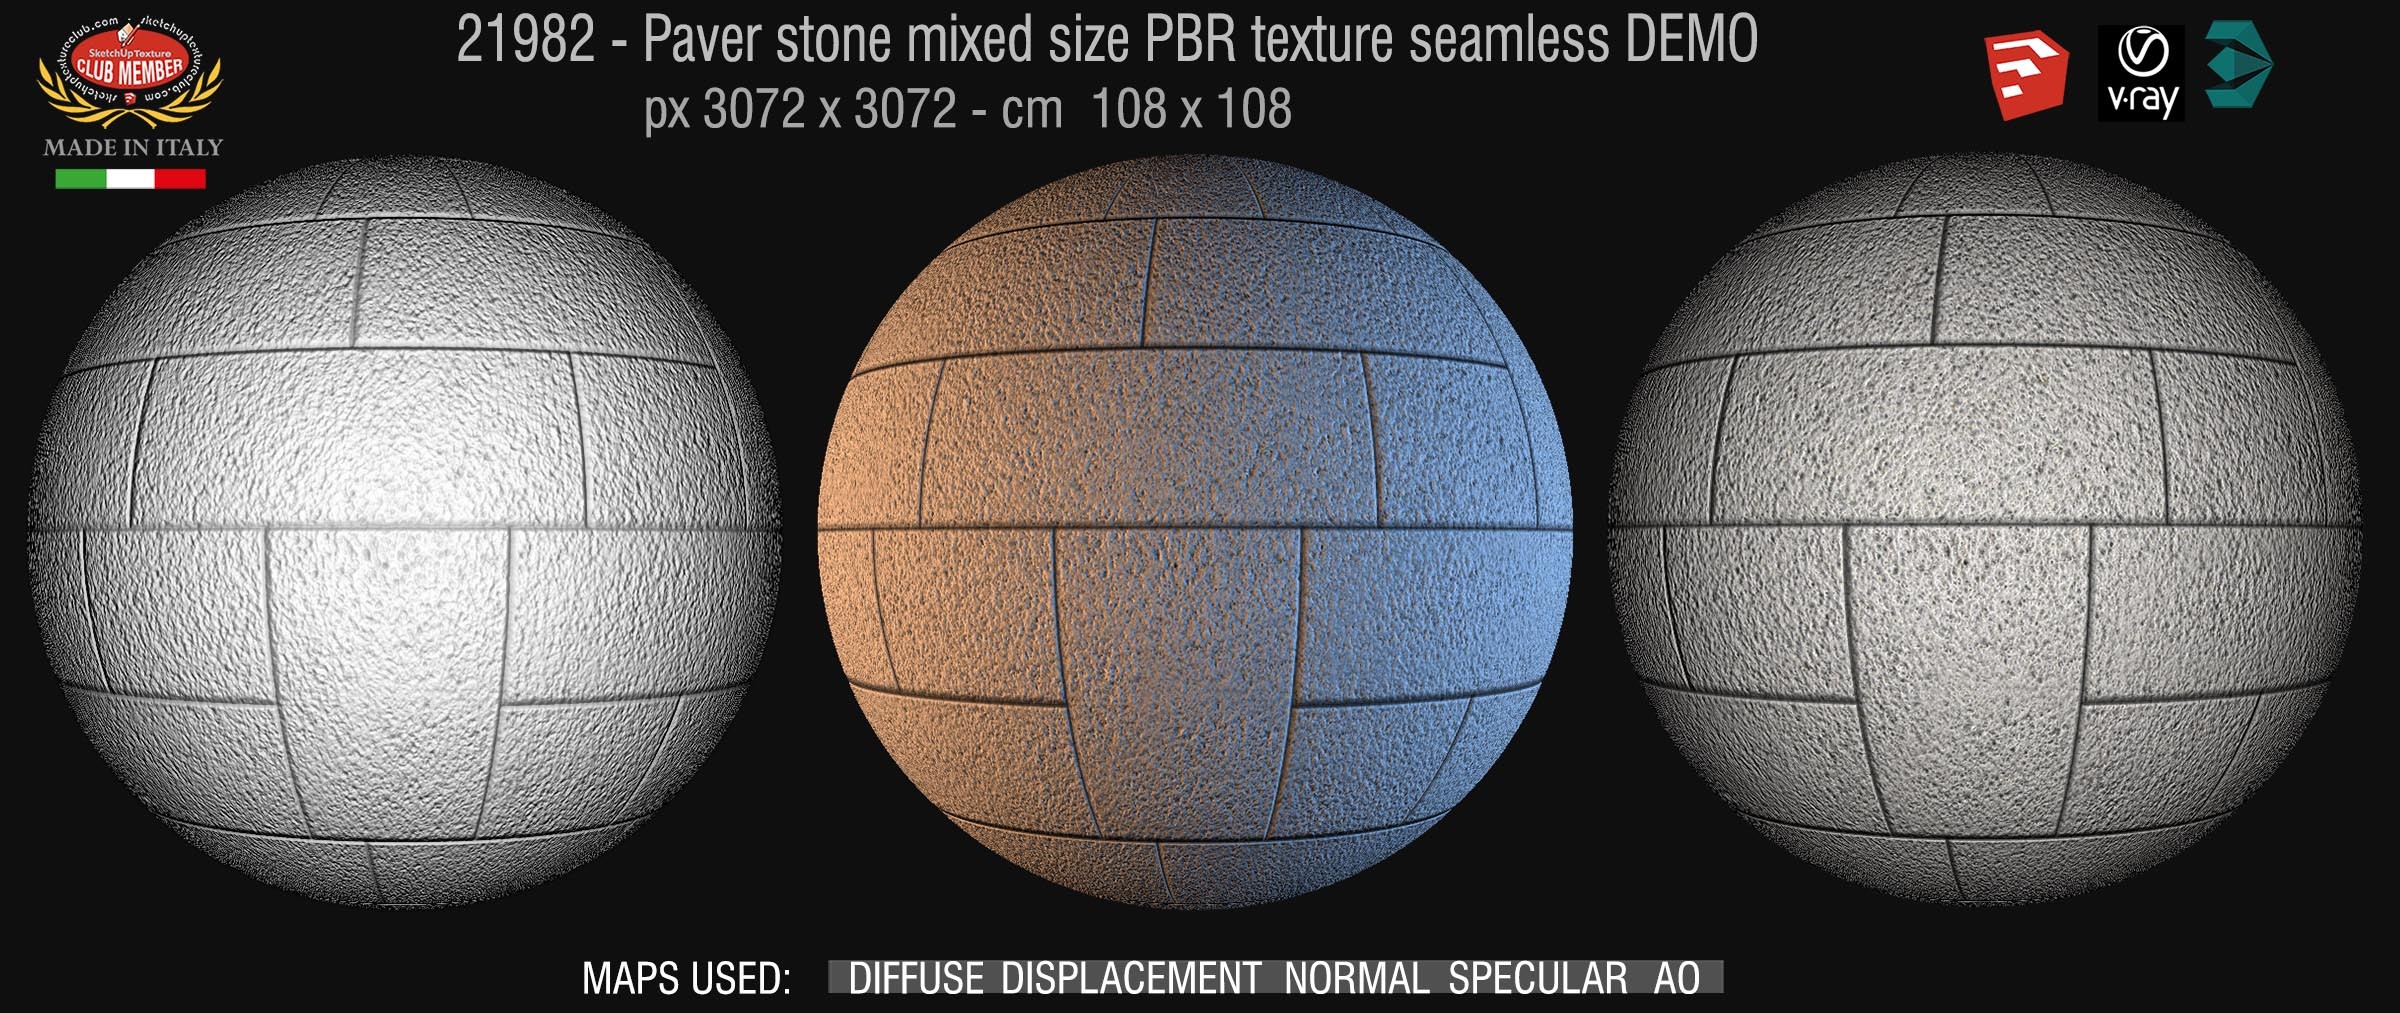 21982 Pavers stone mixed size PBR texture seamless DEMO